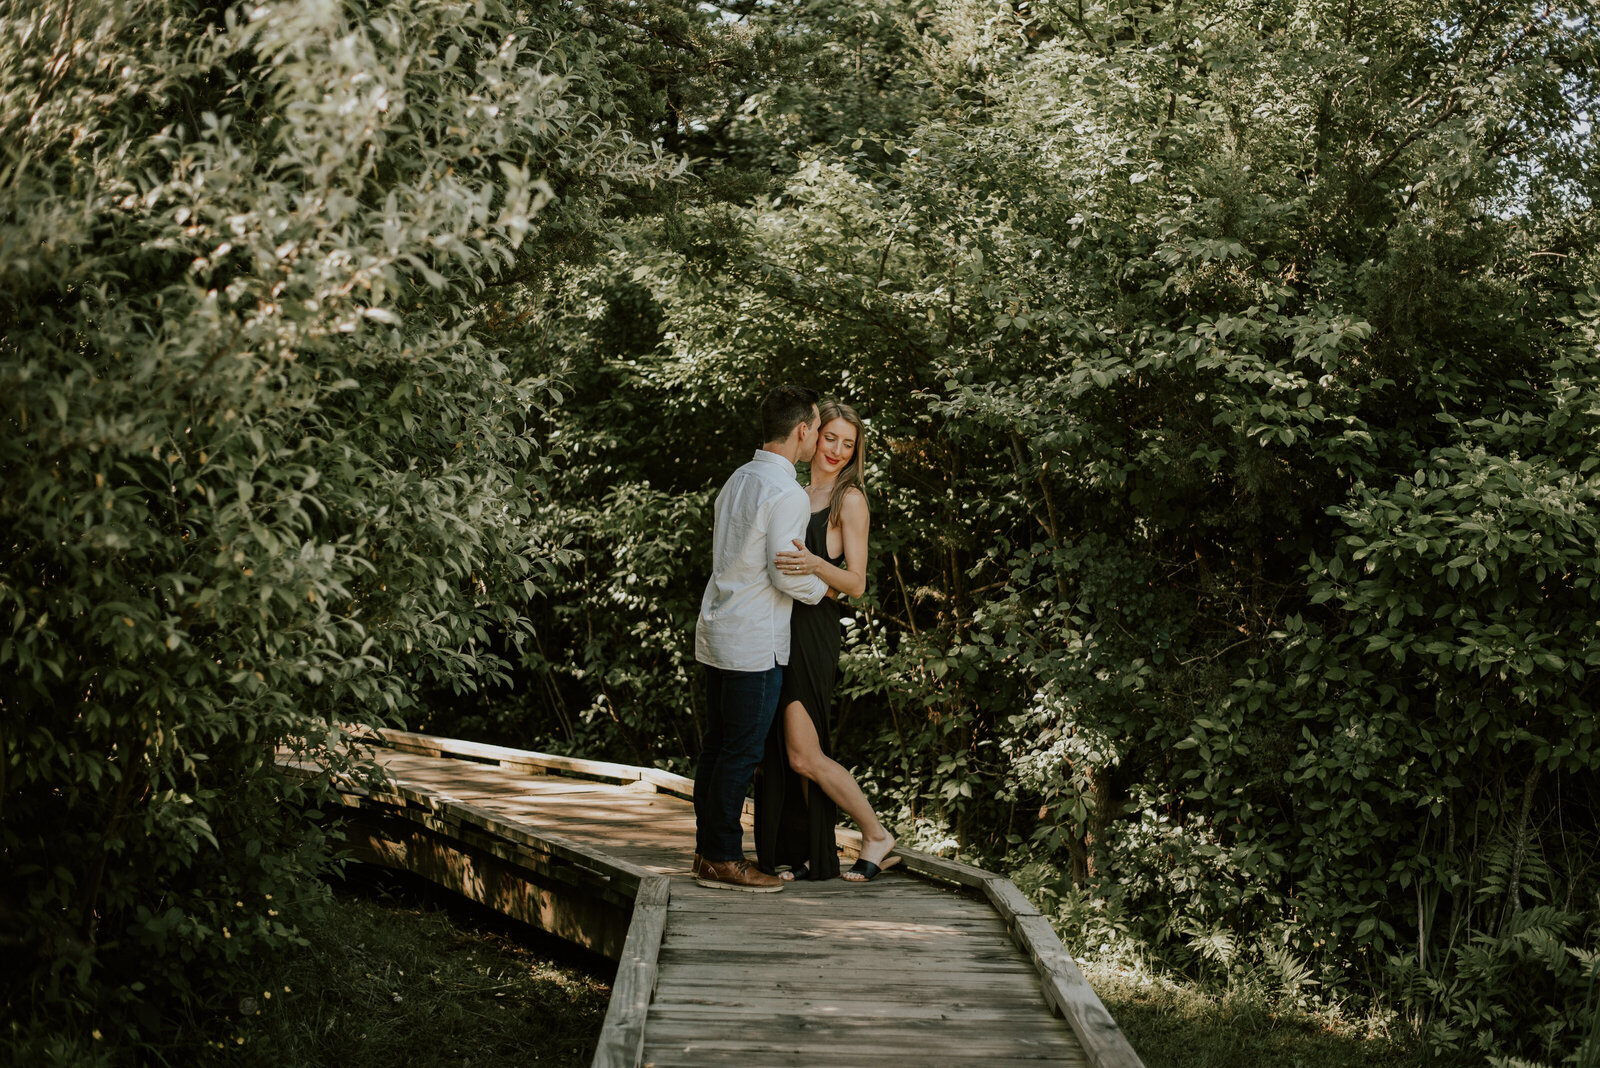 MAINGALLERY2021-06-05 Lindsey and Andrew Engagement Session103631-28